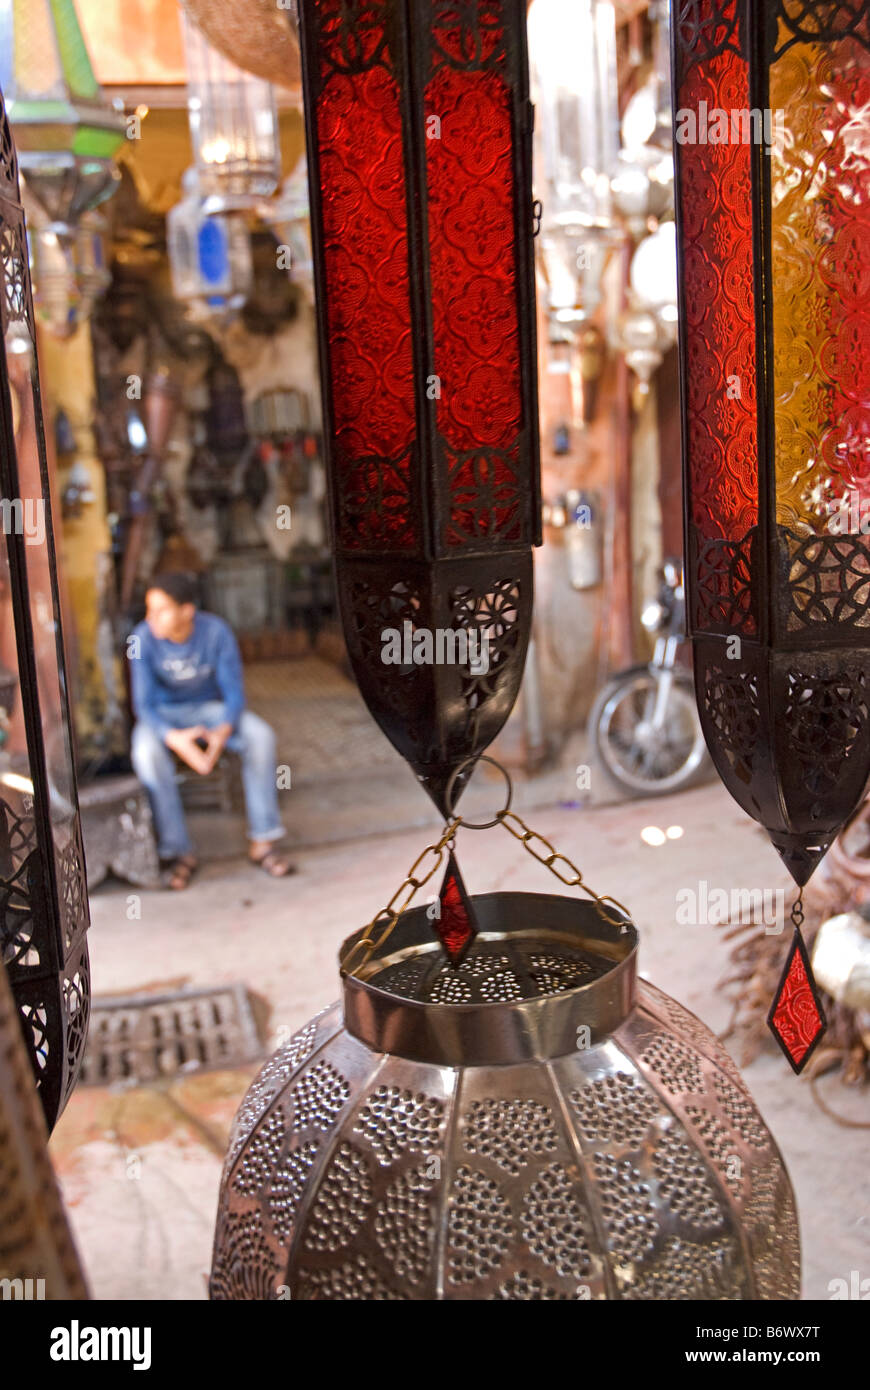 Morocco, Marrakech, Marche des Epices. Spices for sale on a stall in the Spice Market. Stock Photo